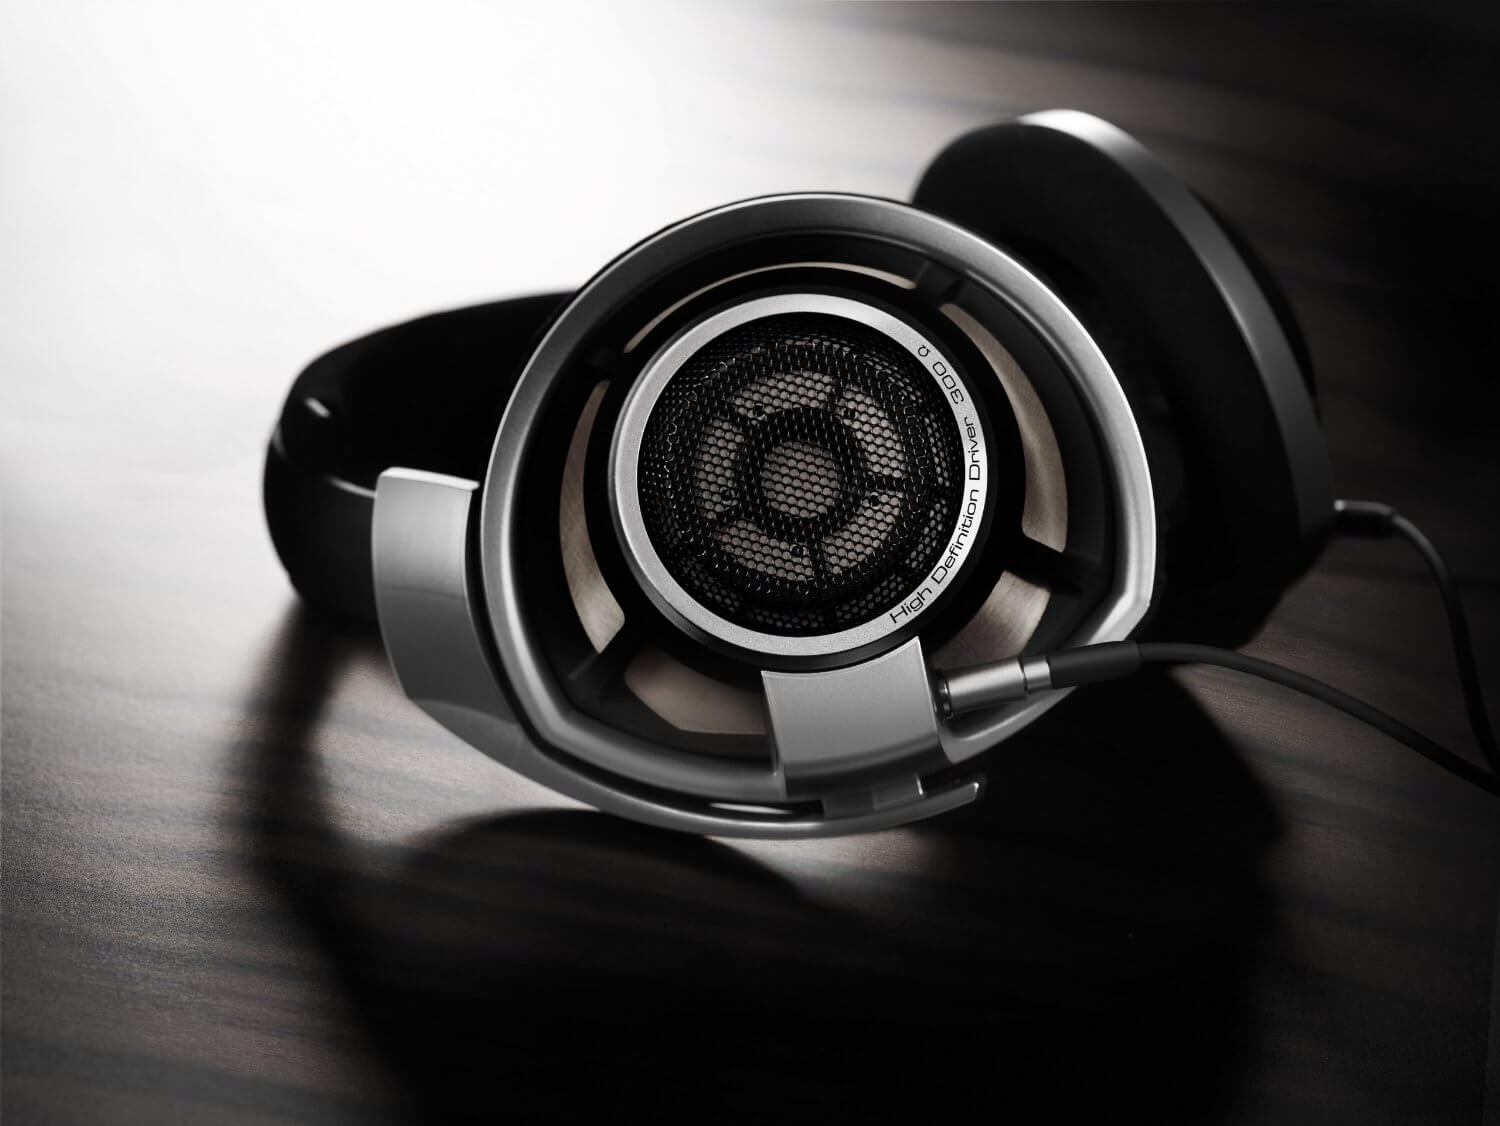 Sennheiser's headphone software had a serious security flaw that could compromise your entire web browsing